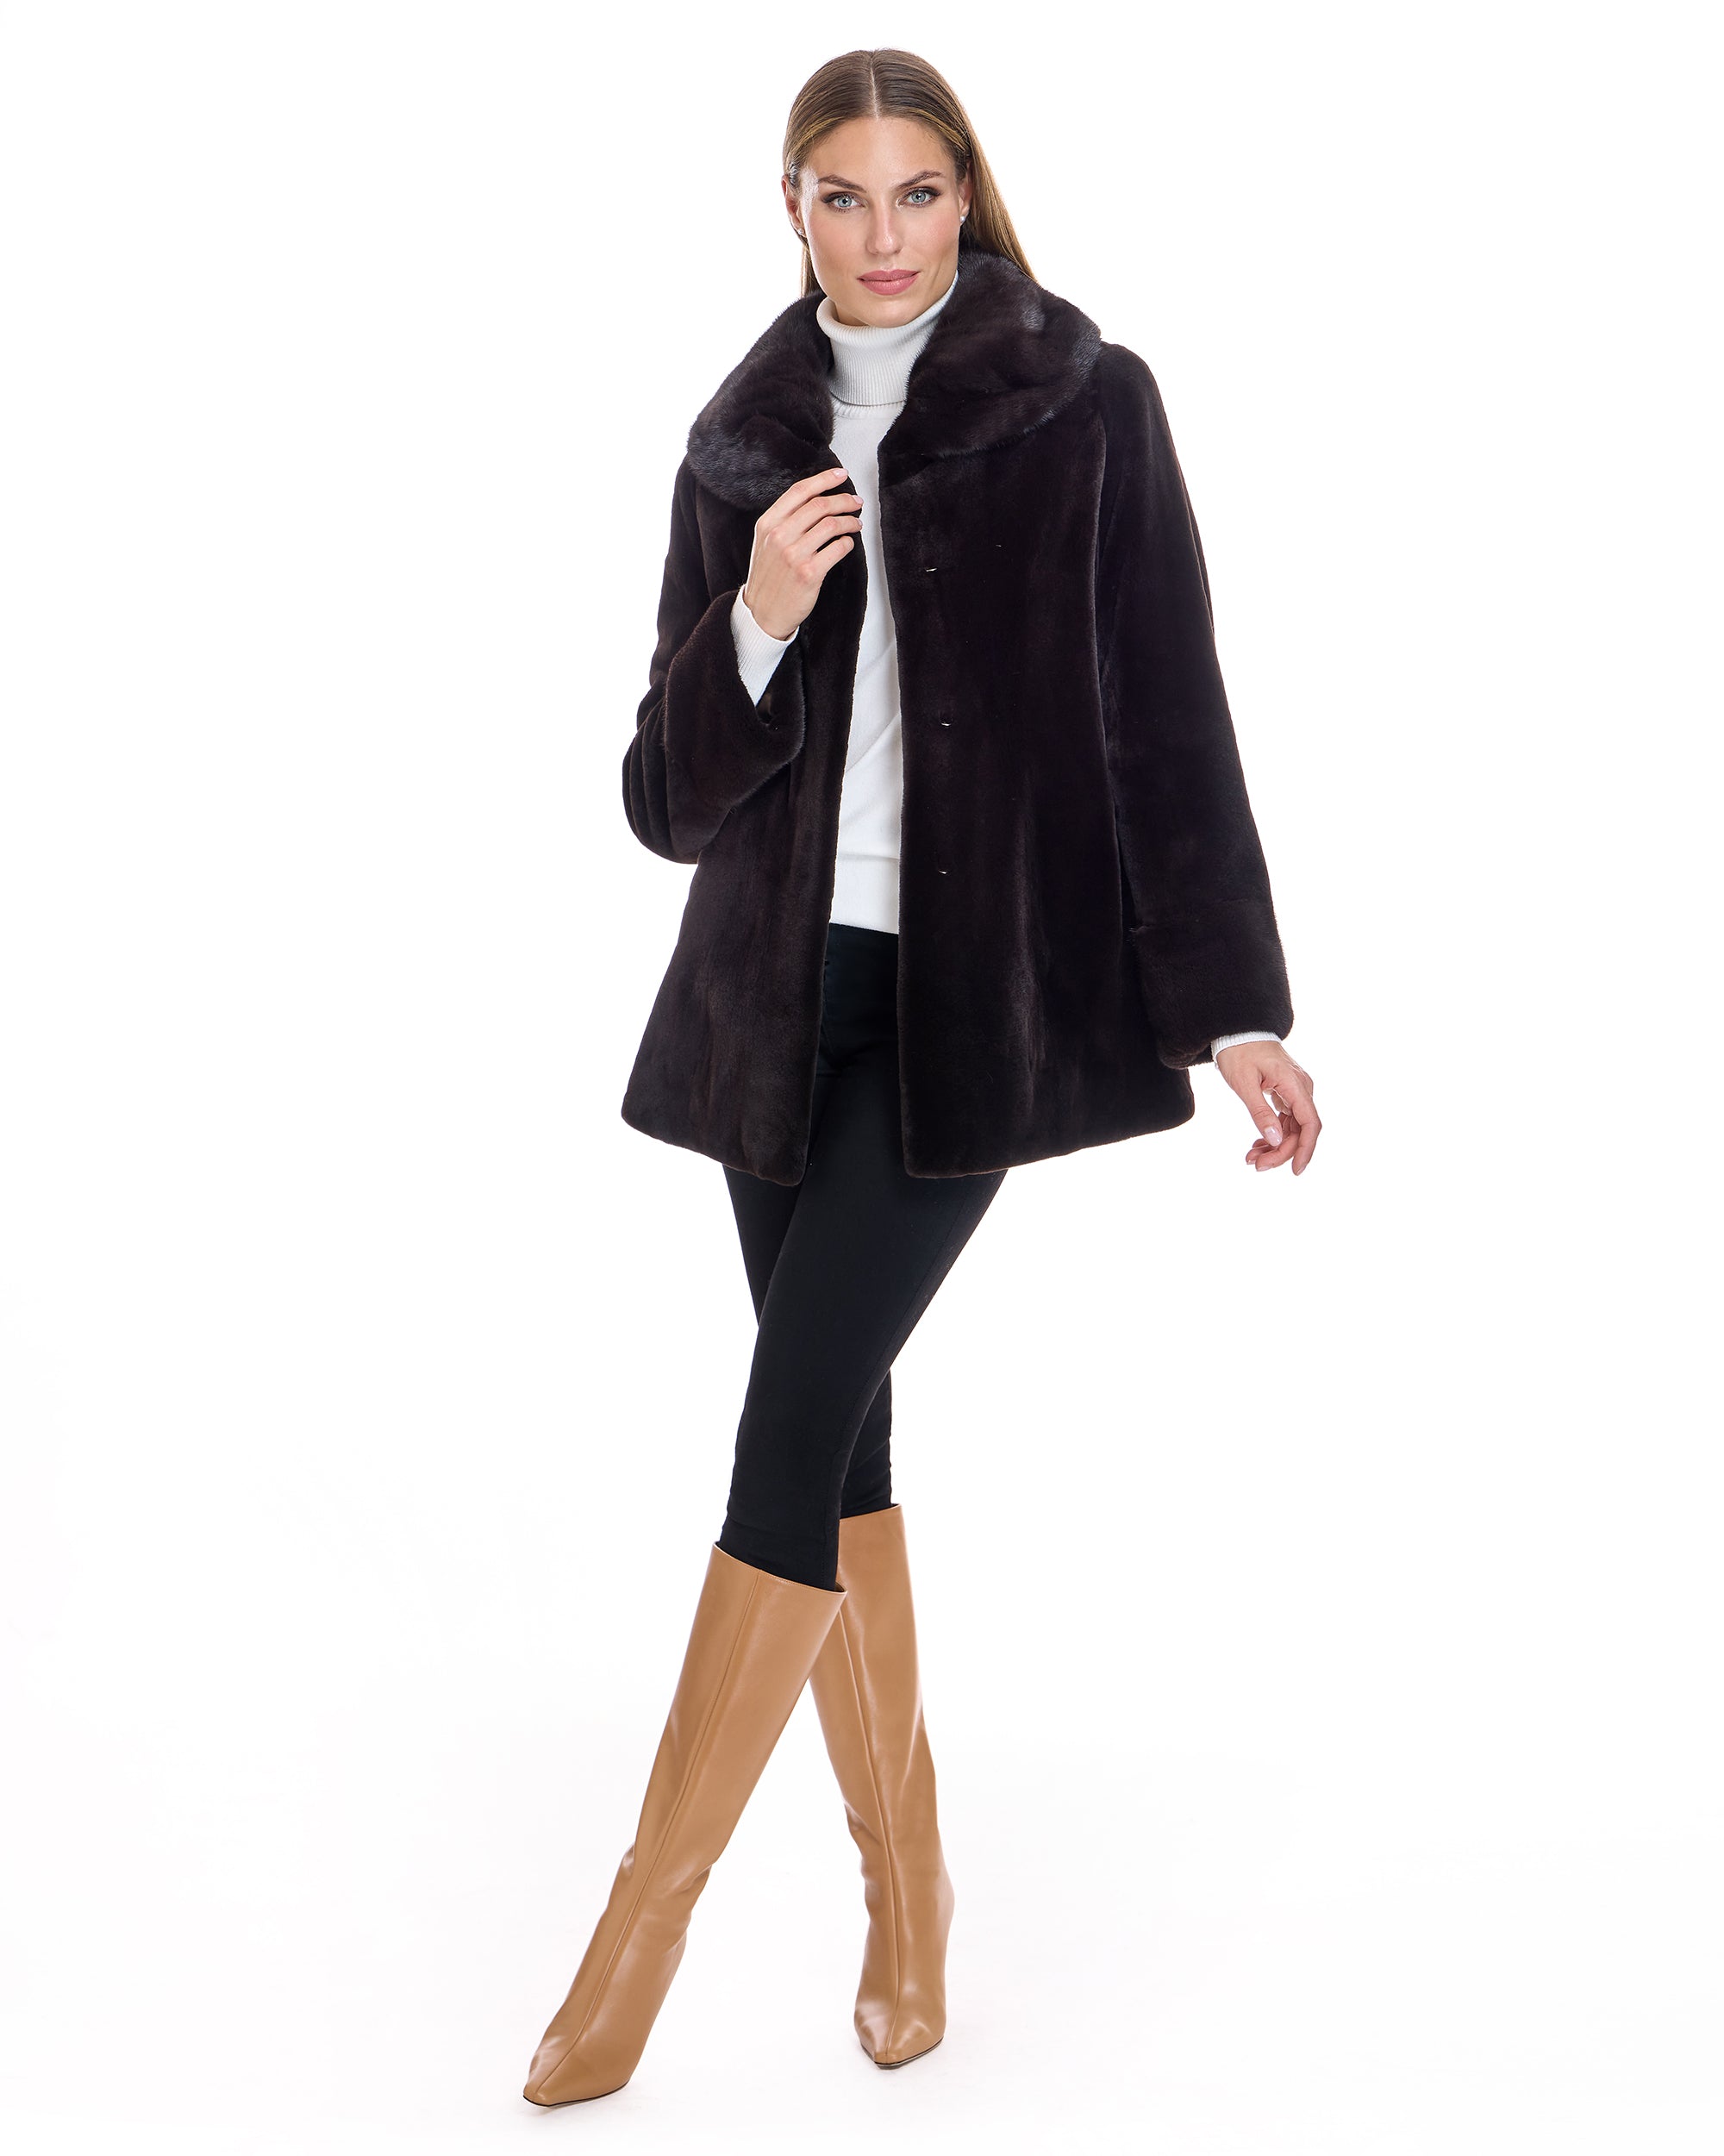 Sheared Mink Jacket with Round Long Hair mink Collar